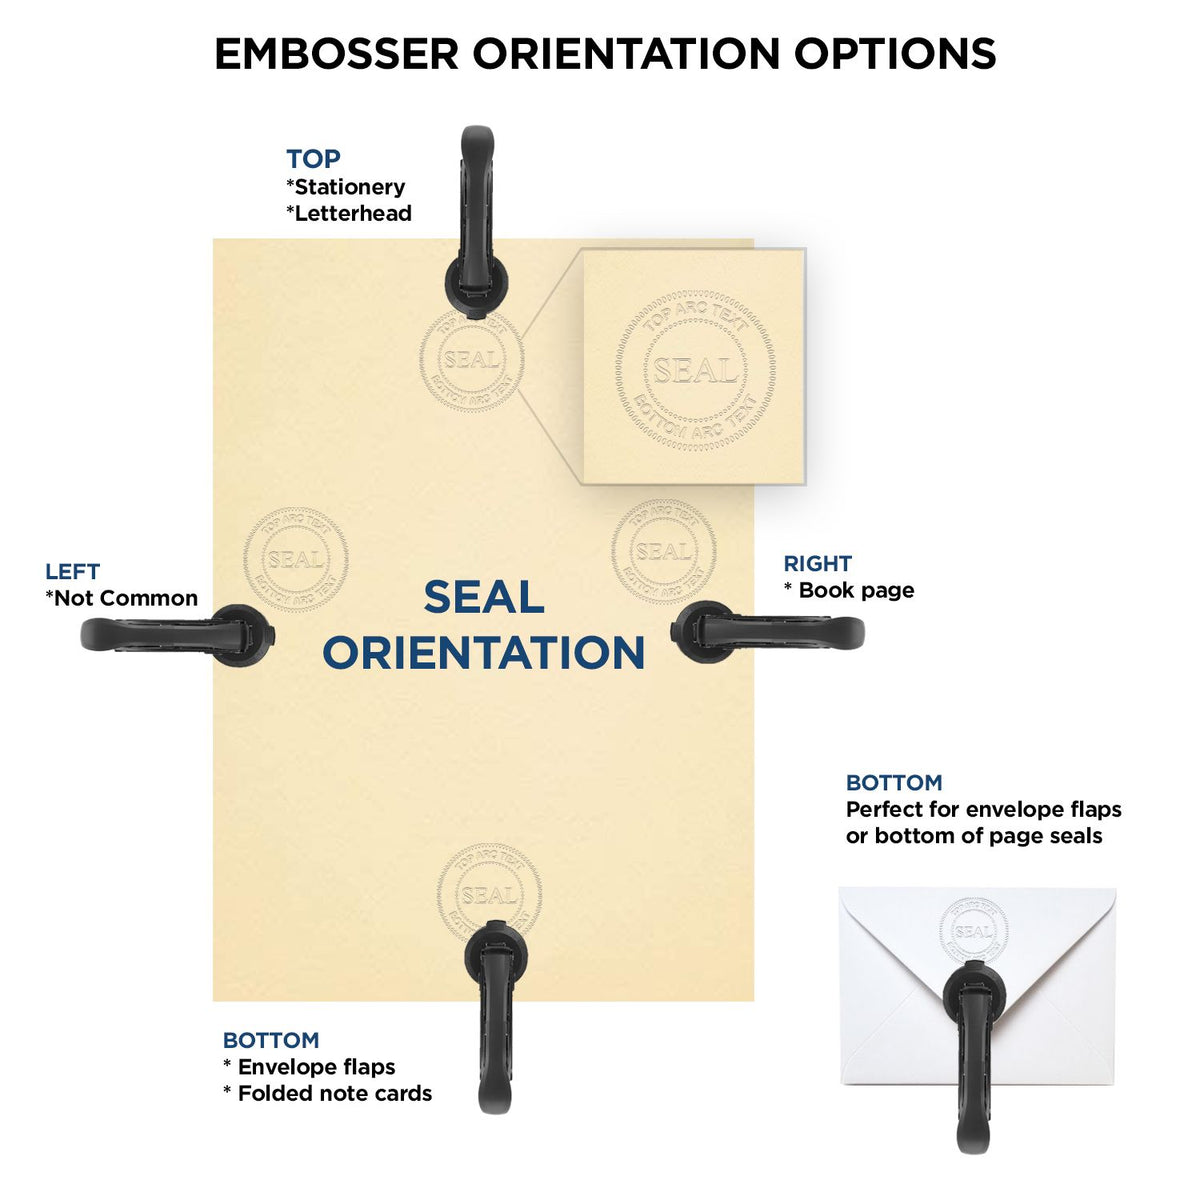 An infographic for the Heavy Duty Cast Iron Kansas Engineer Seal Embosser showing embosser orientation, this is showing examples of a top, bottom, right and left insert.